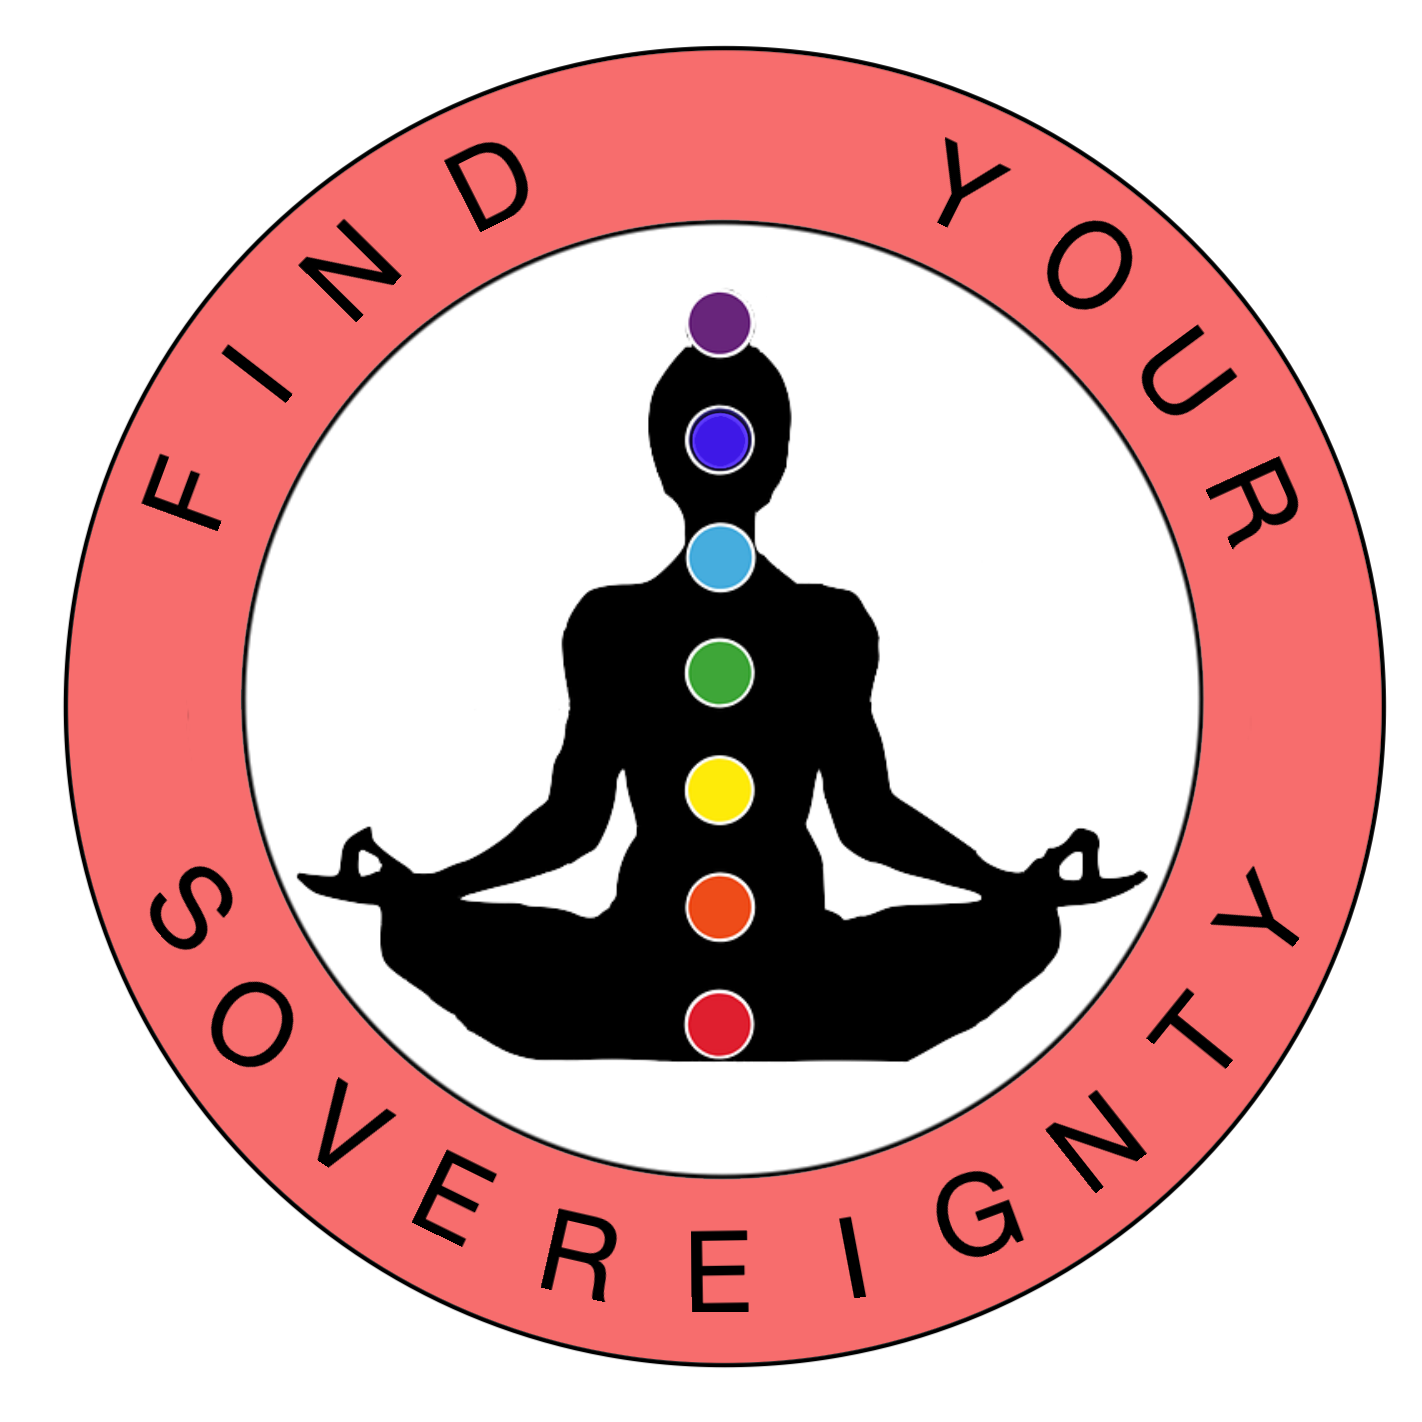 Find Your Sovereignty